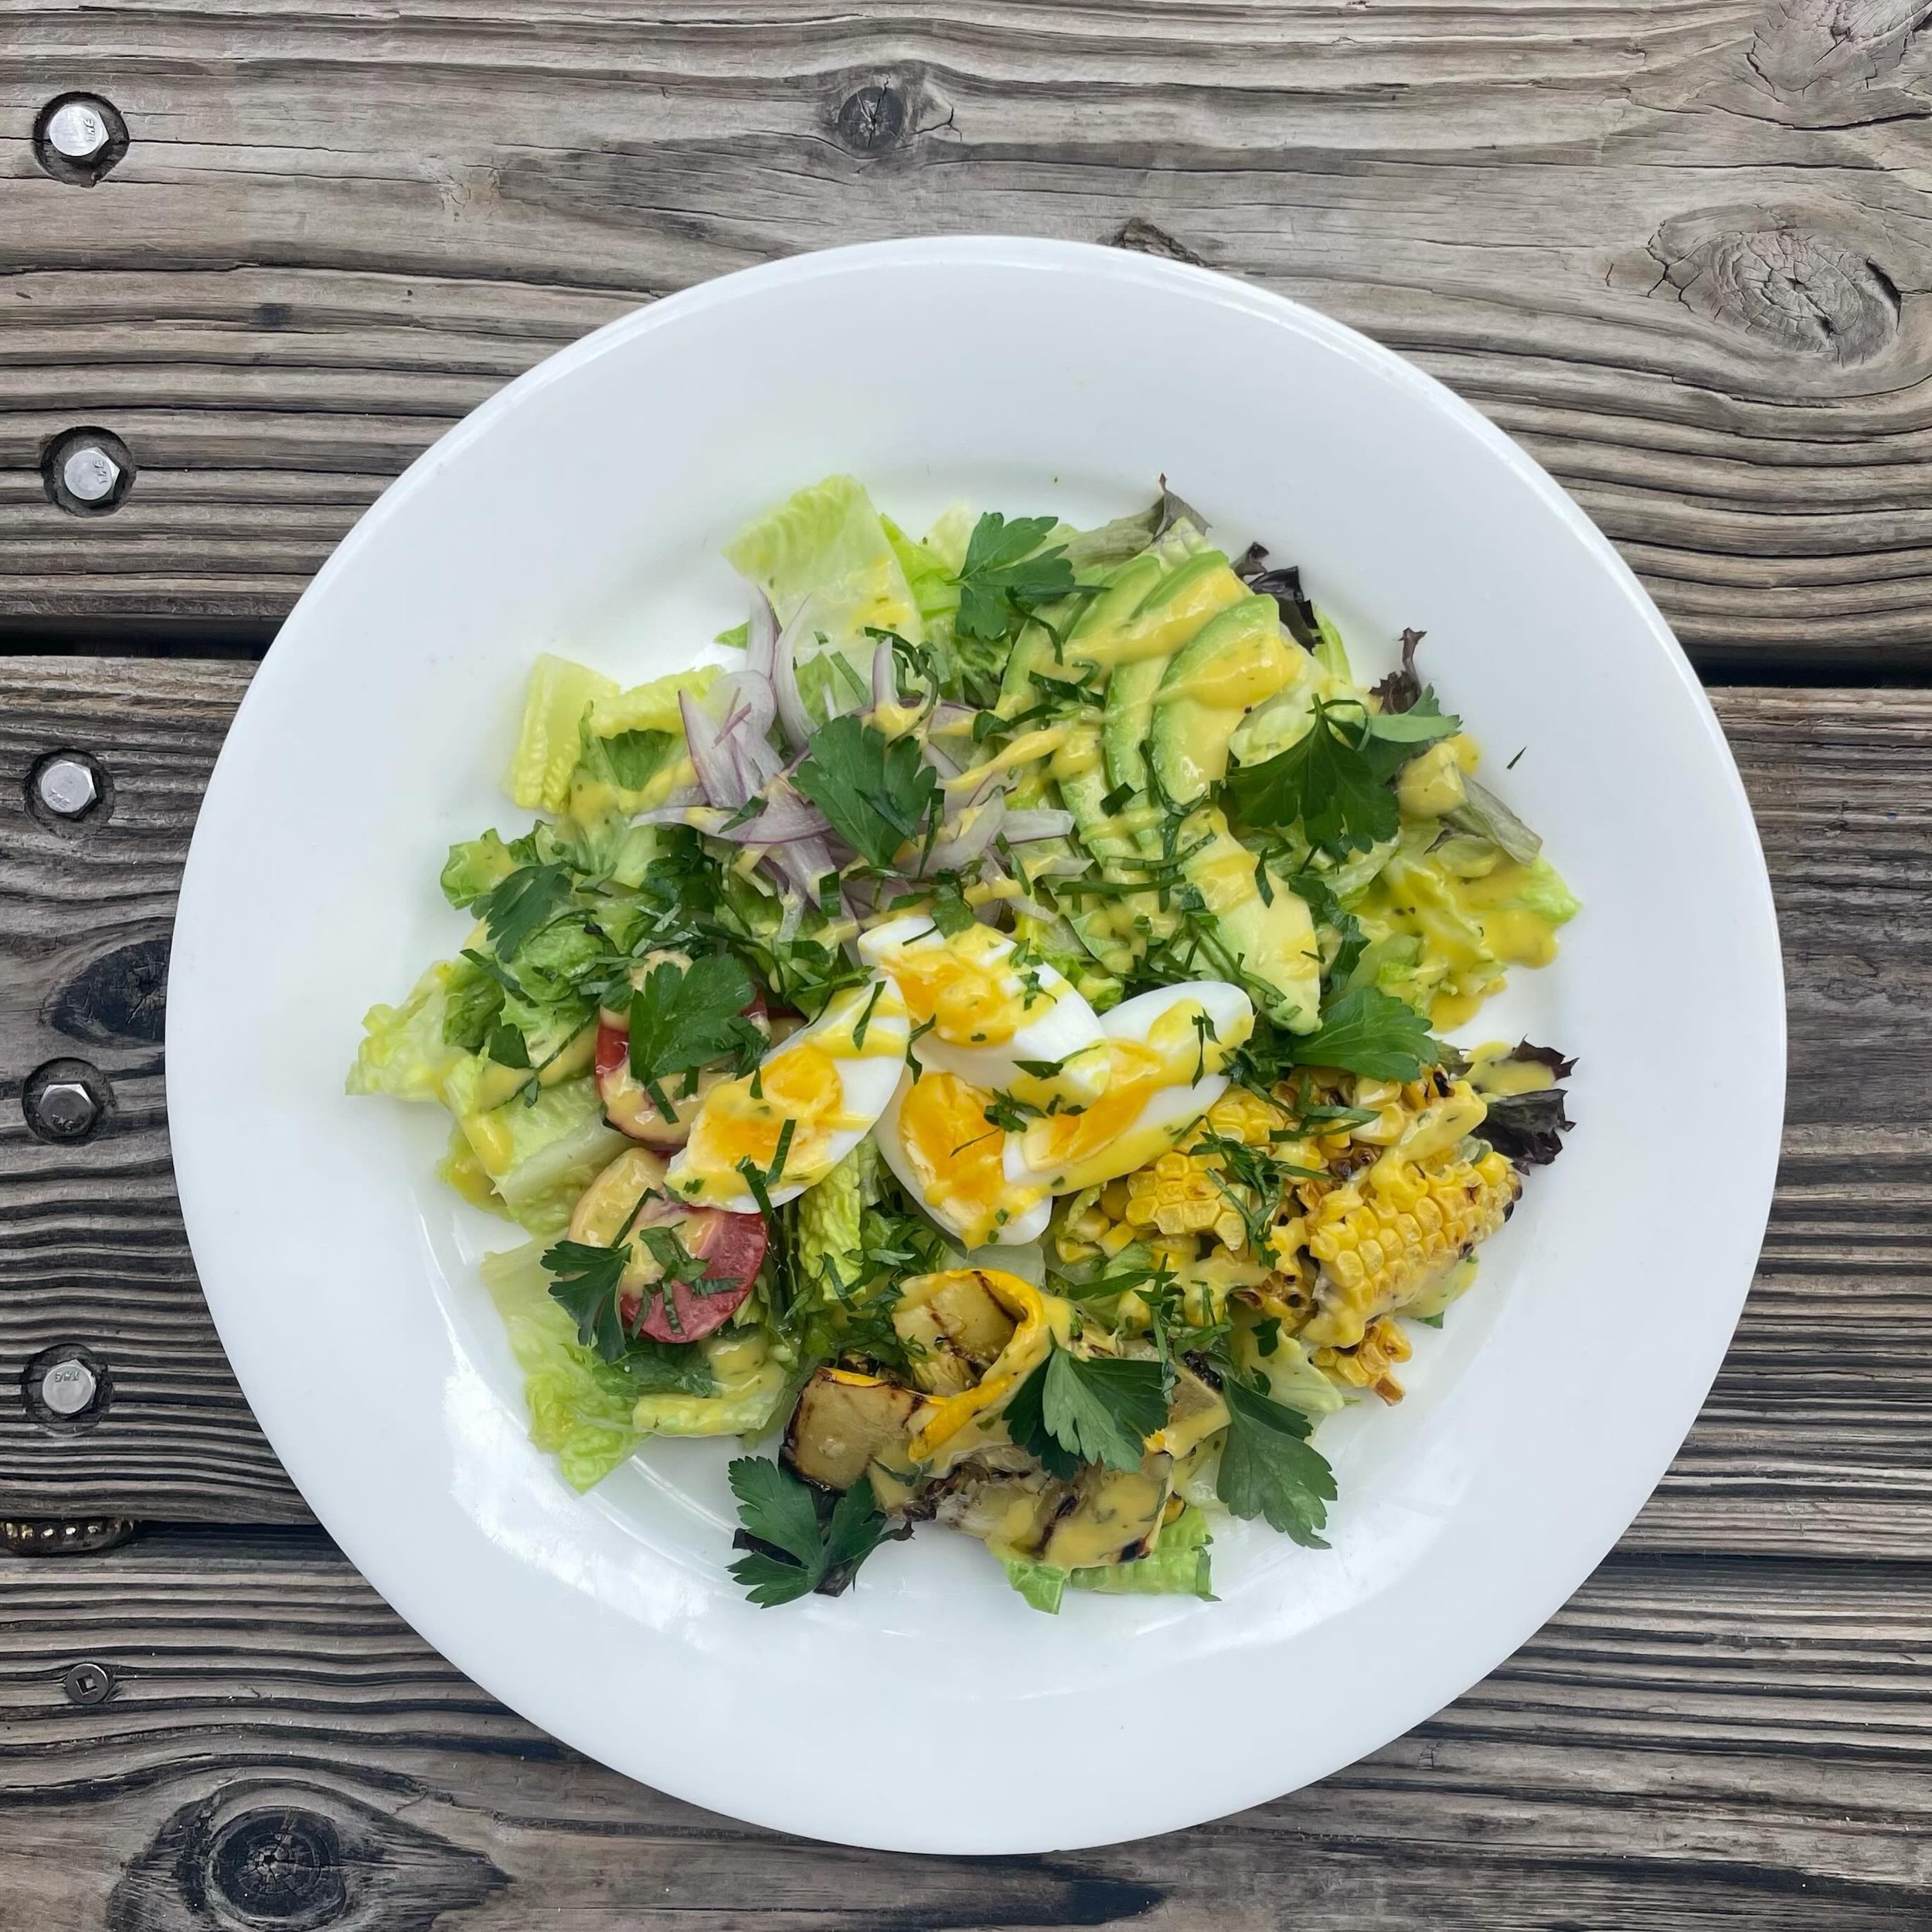 COBB salad |  Corn, courgettes, red onion, eggs, avocado, green leaves, fine herbs, mango &amp; lime dressing 🥭 🌿

#calypsogrillcayman #grandcayman #caymanislands #caymankind